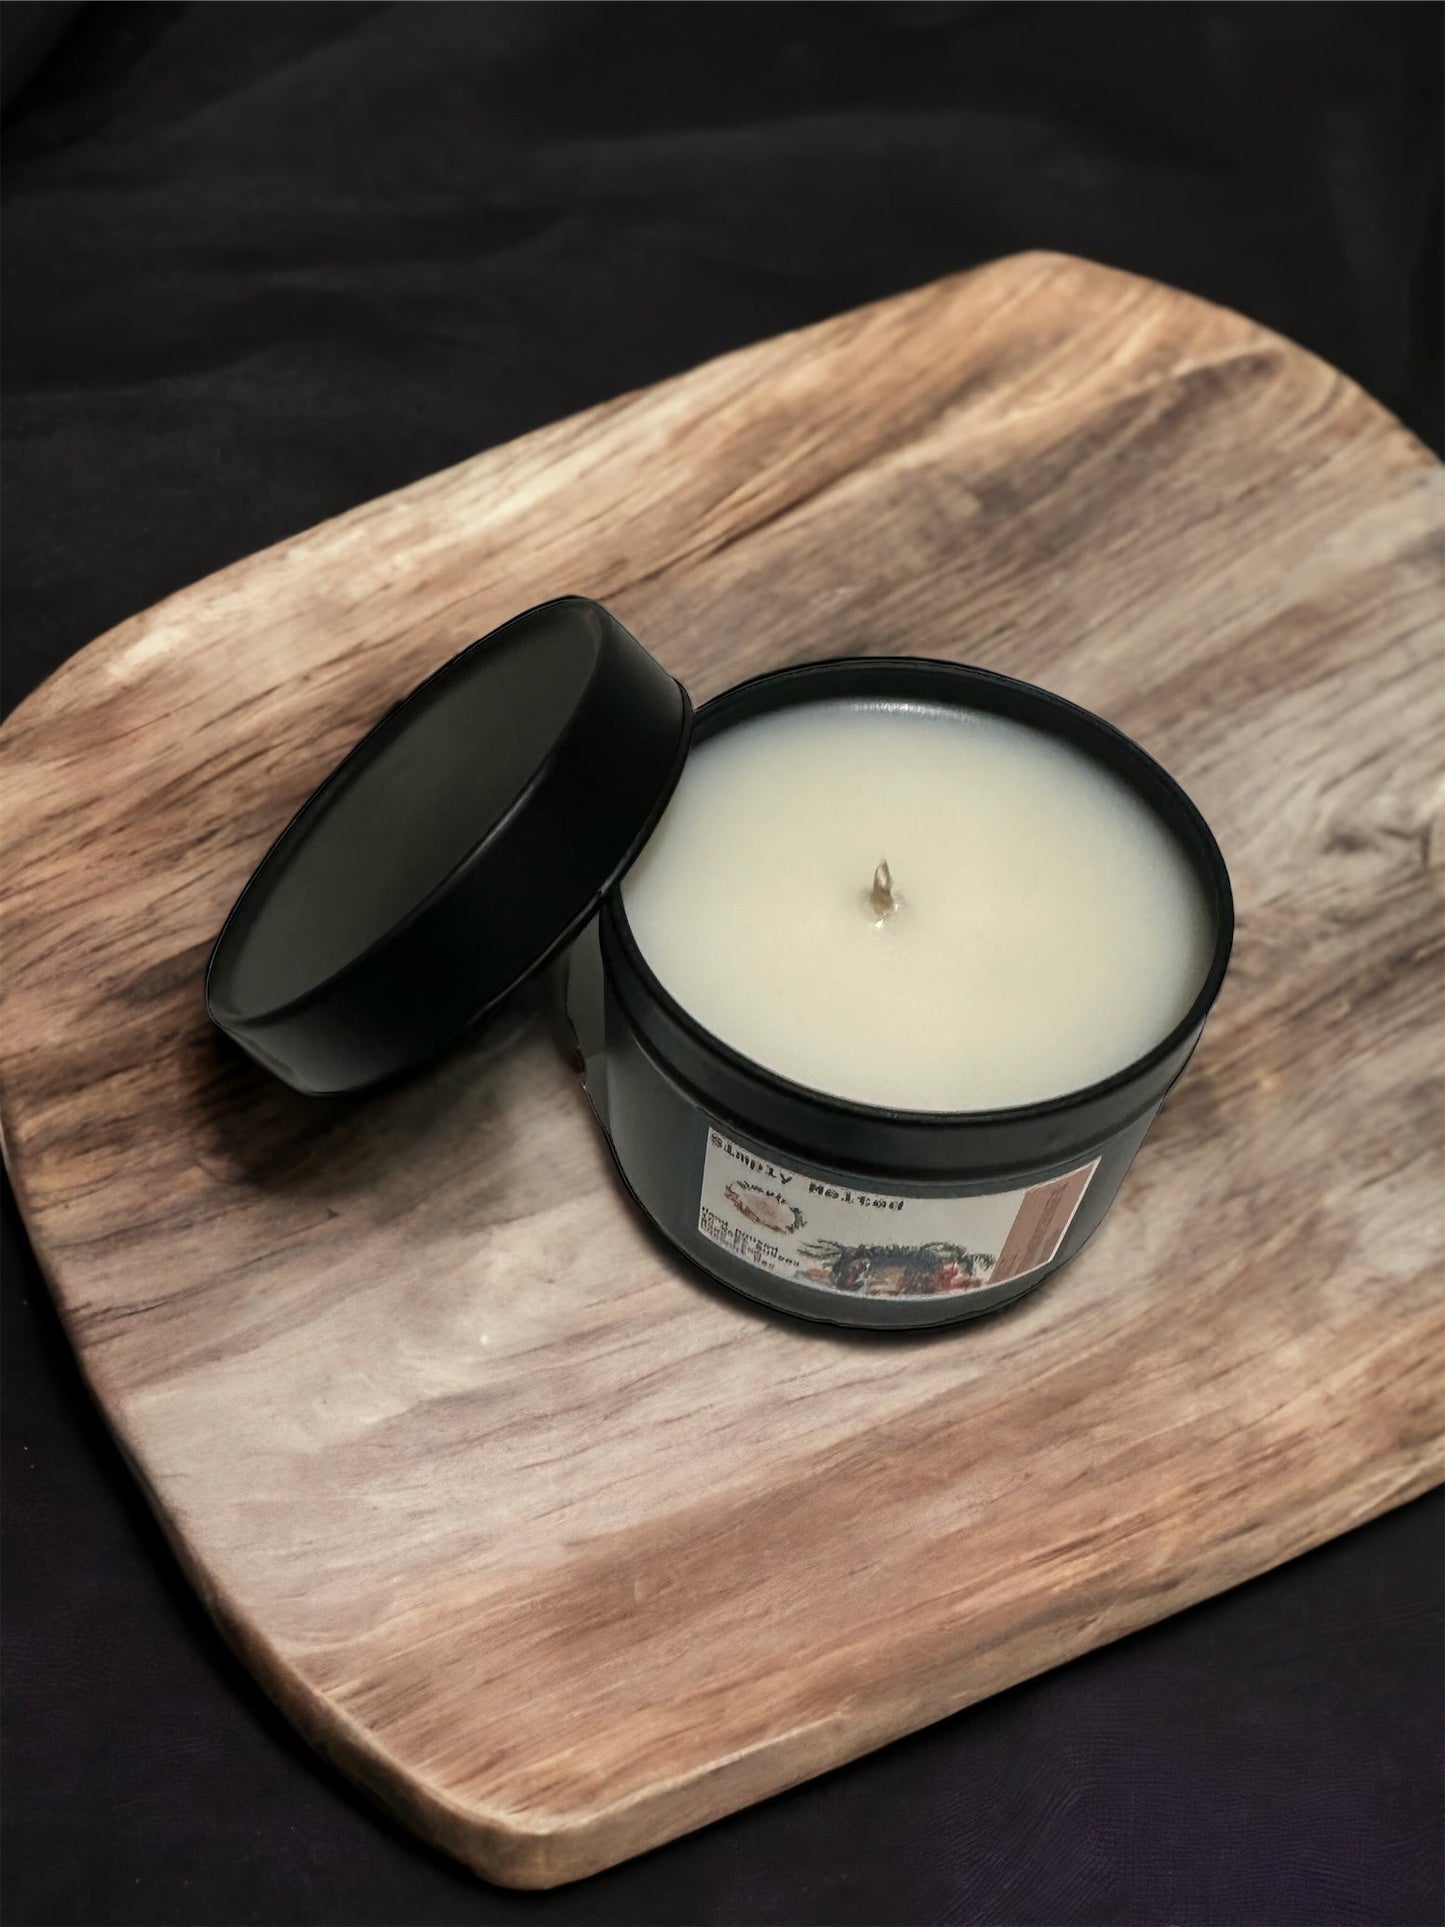 Gold, Frankincense and Myrrh Candle in a Tin - Simply Melted